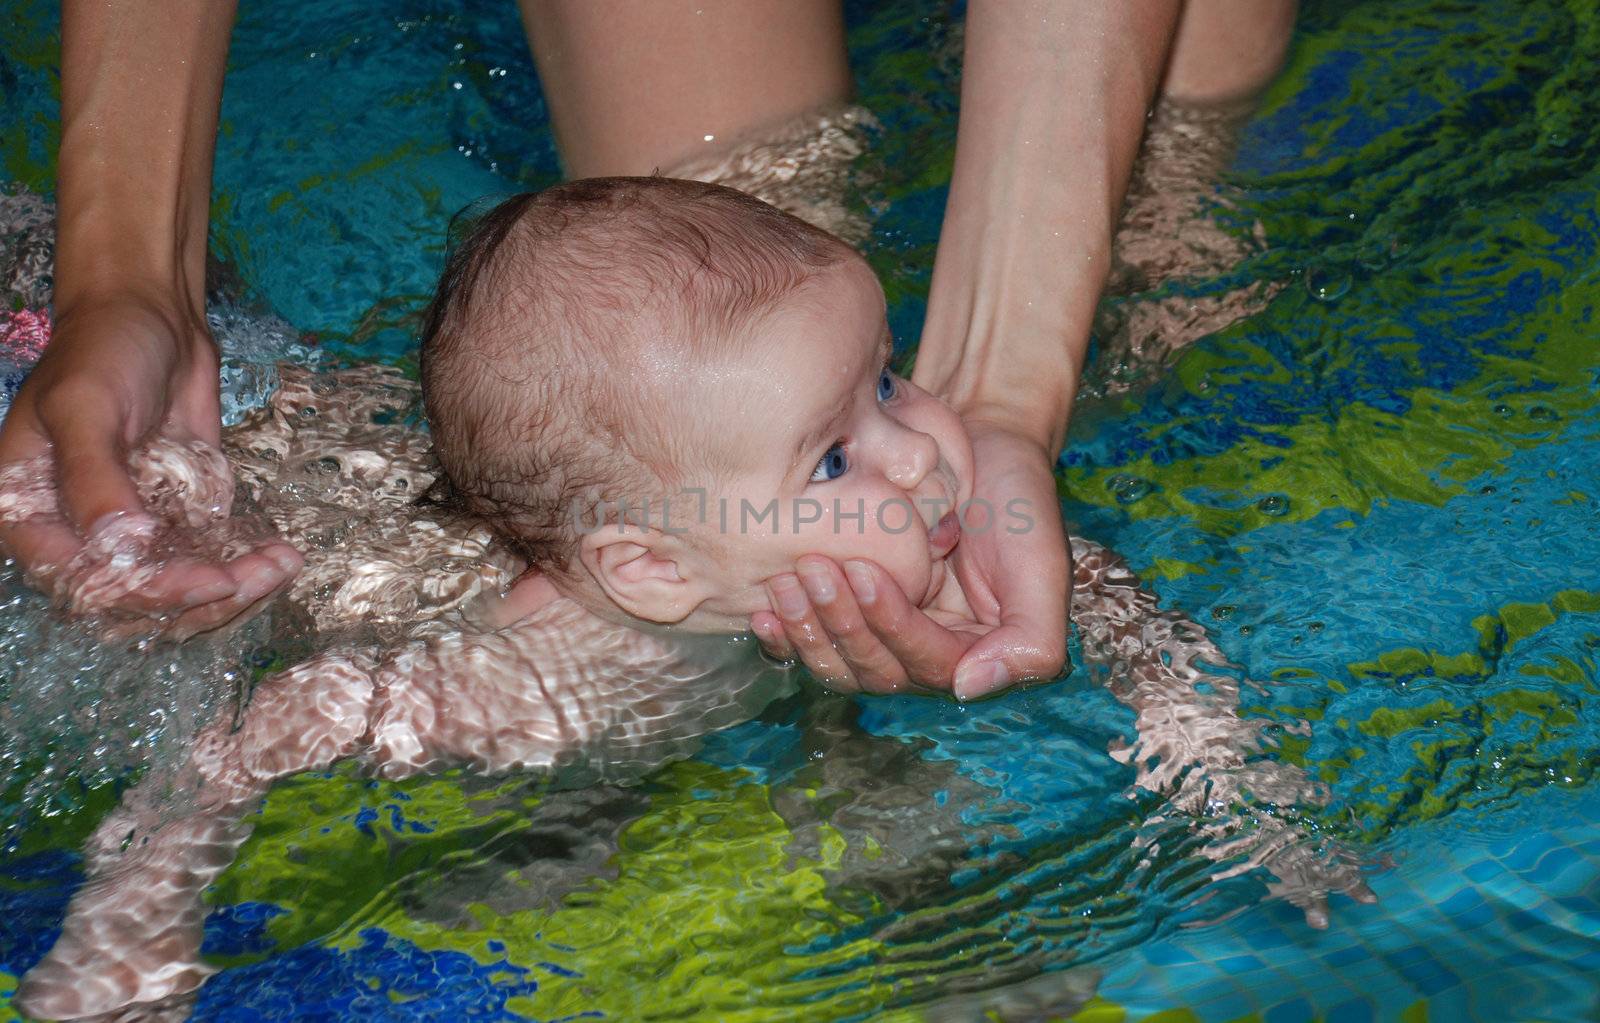 Teaching baby swimming in the pool